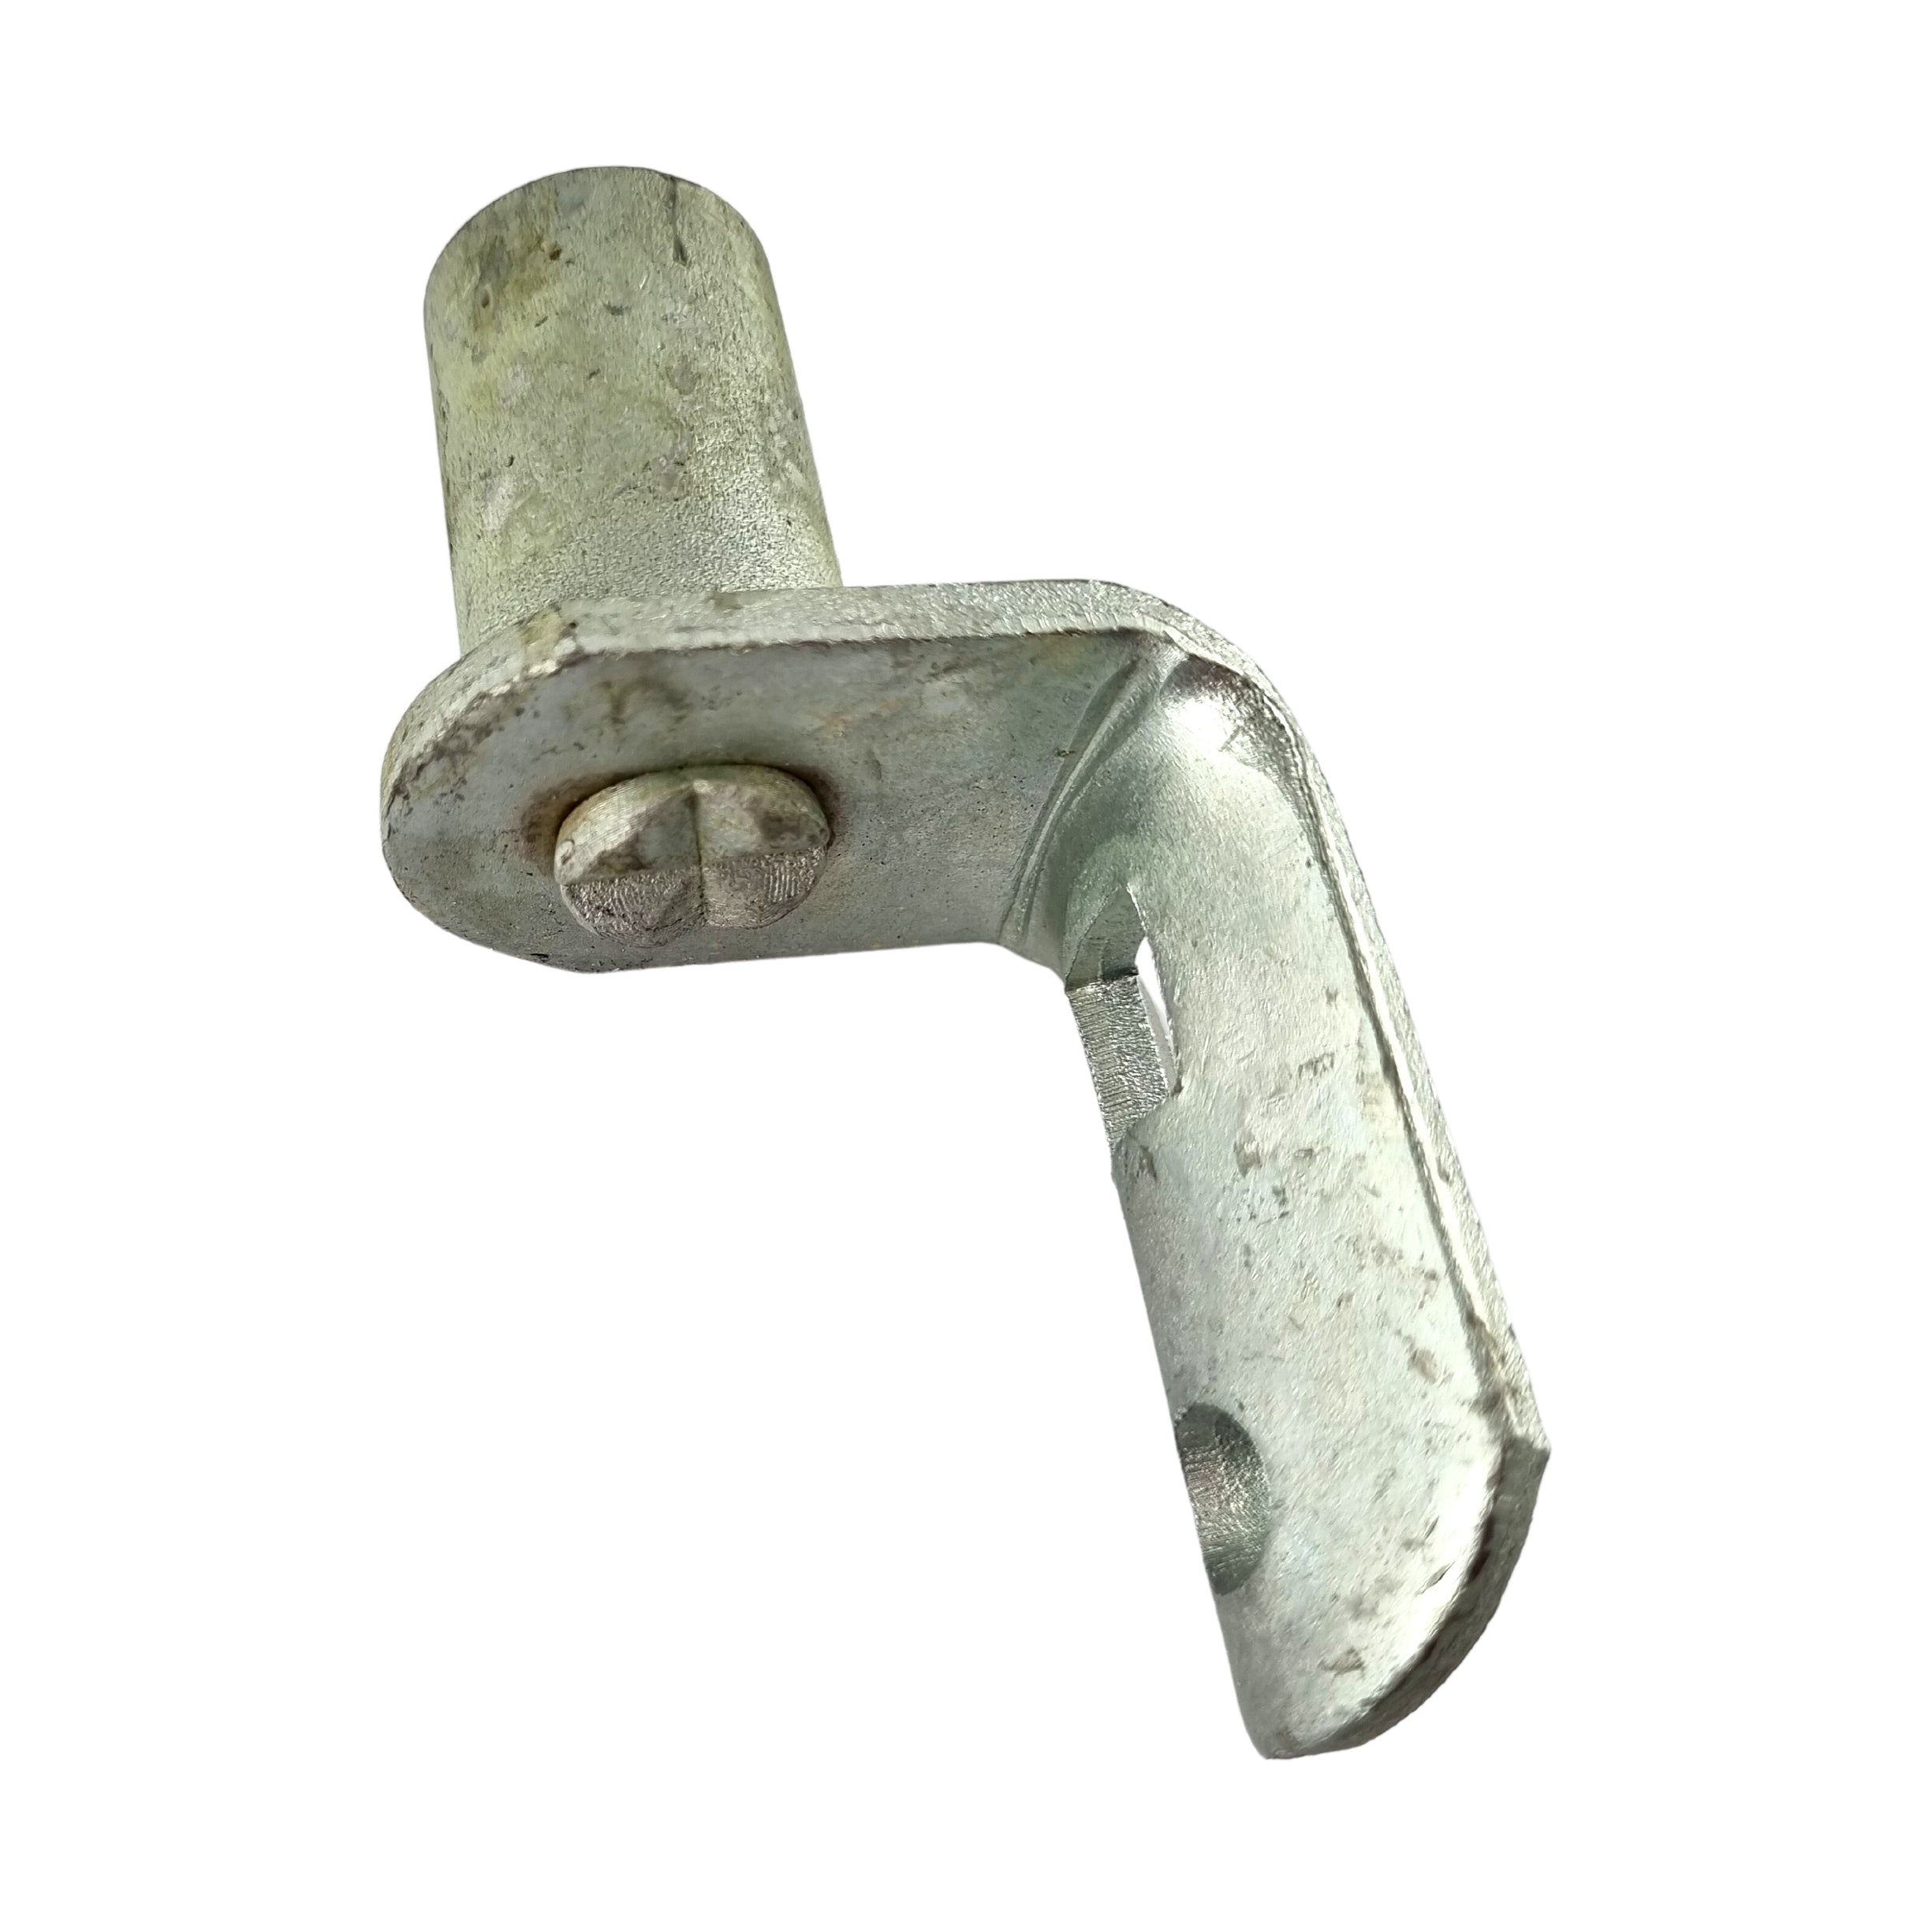 Short Plate Gudgeon - Heavy Duty - Round Flat Post Fitting - Galvanised. Australian made. Shop fence and gate fittings online. Chain.com.au. Australia wide shipping.